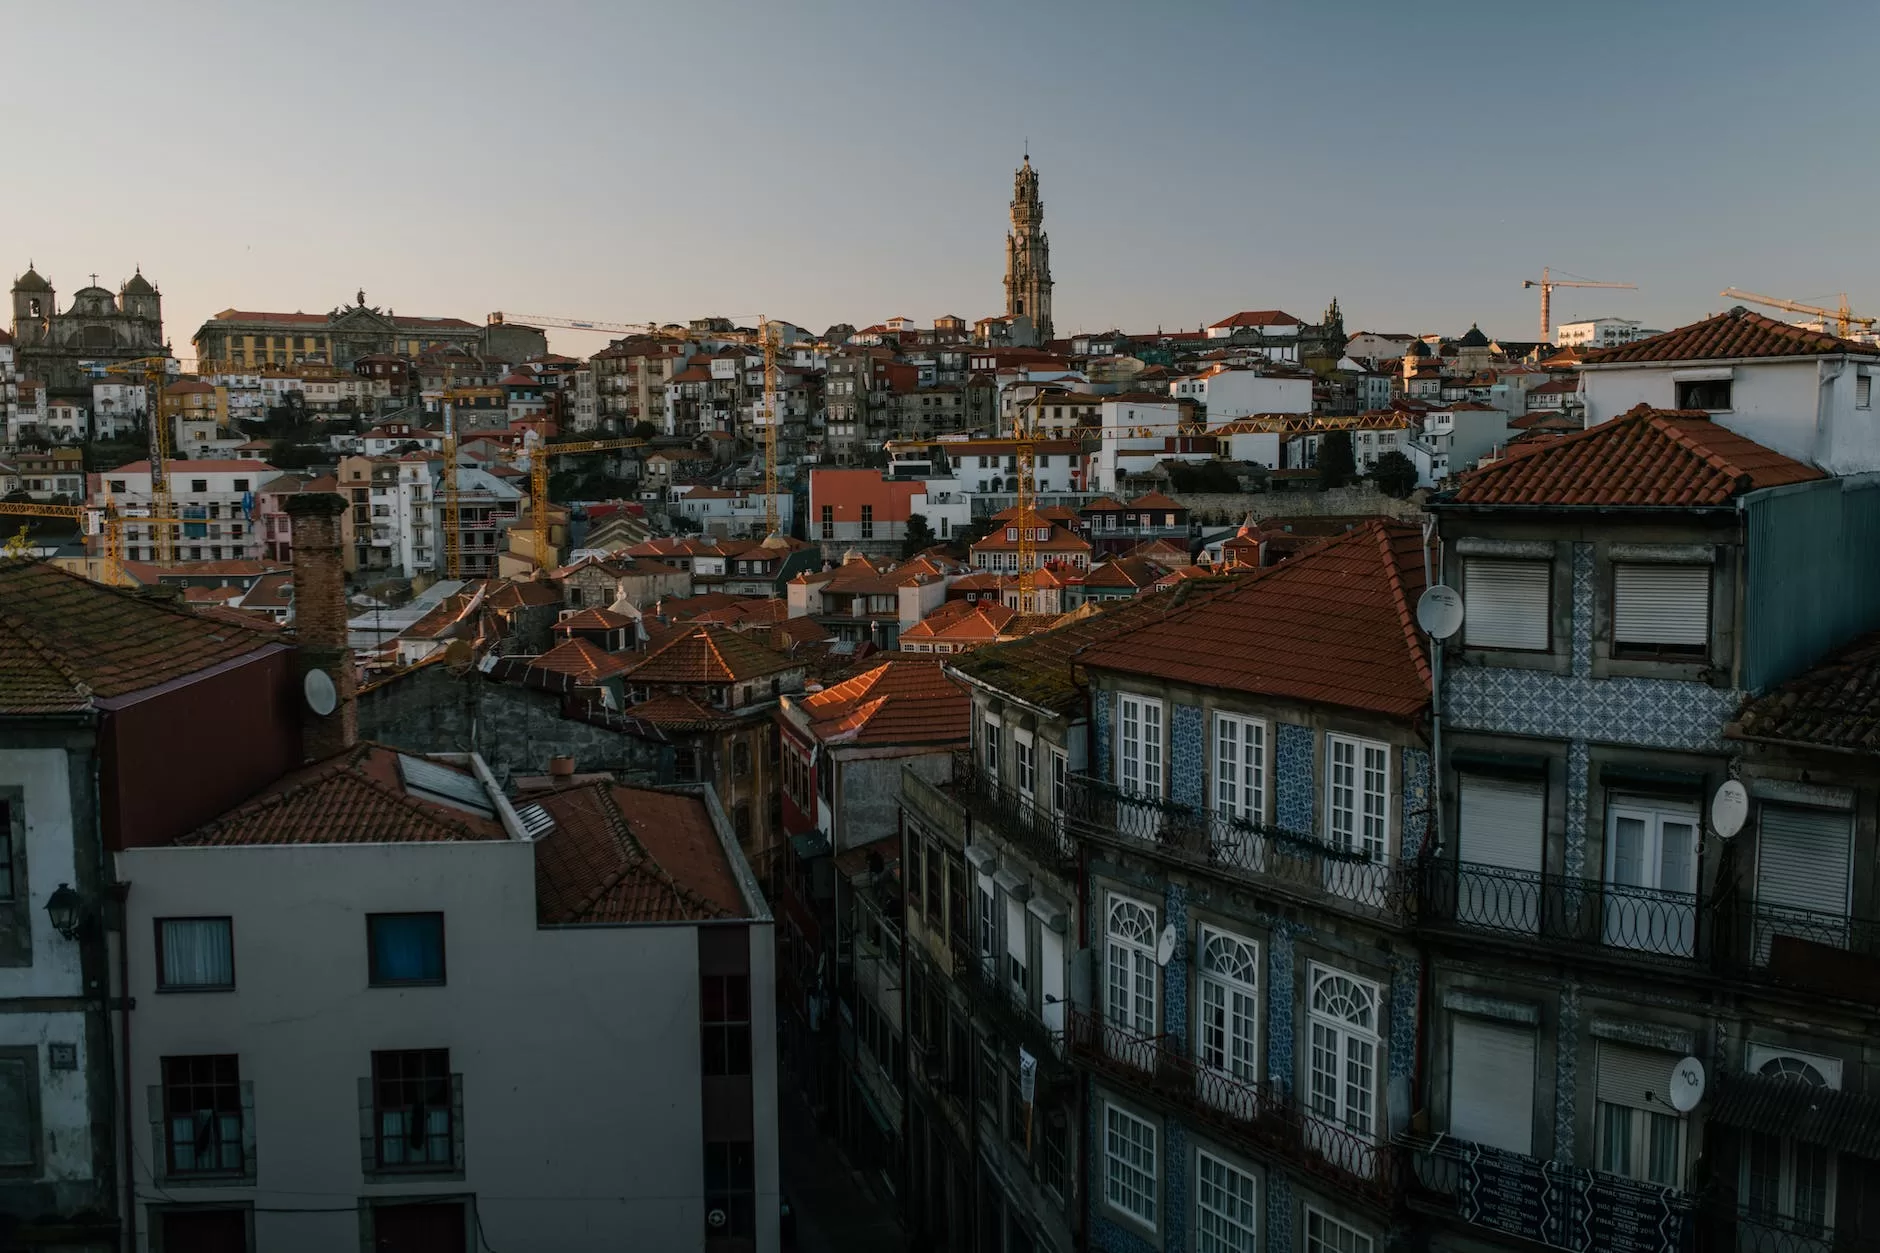 exploring buildings in a town in porto